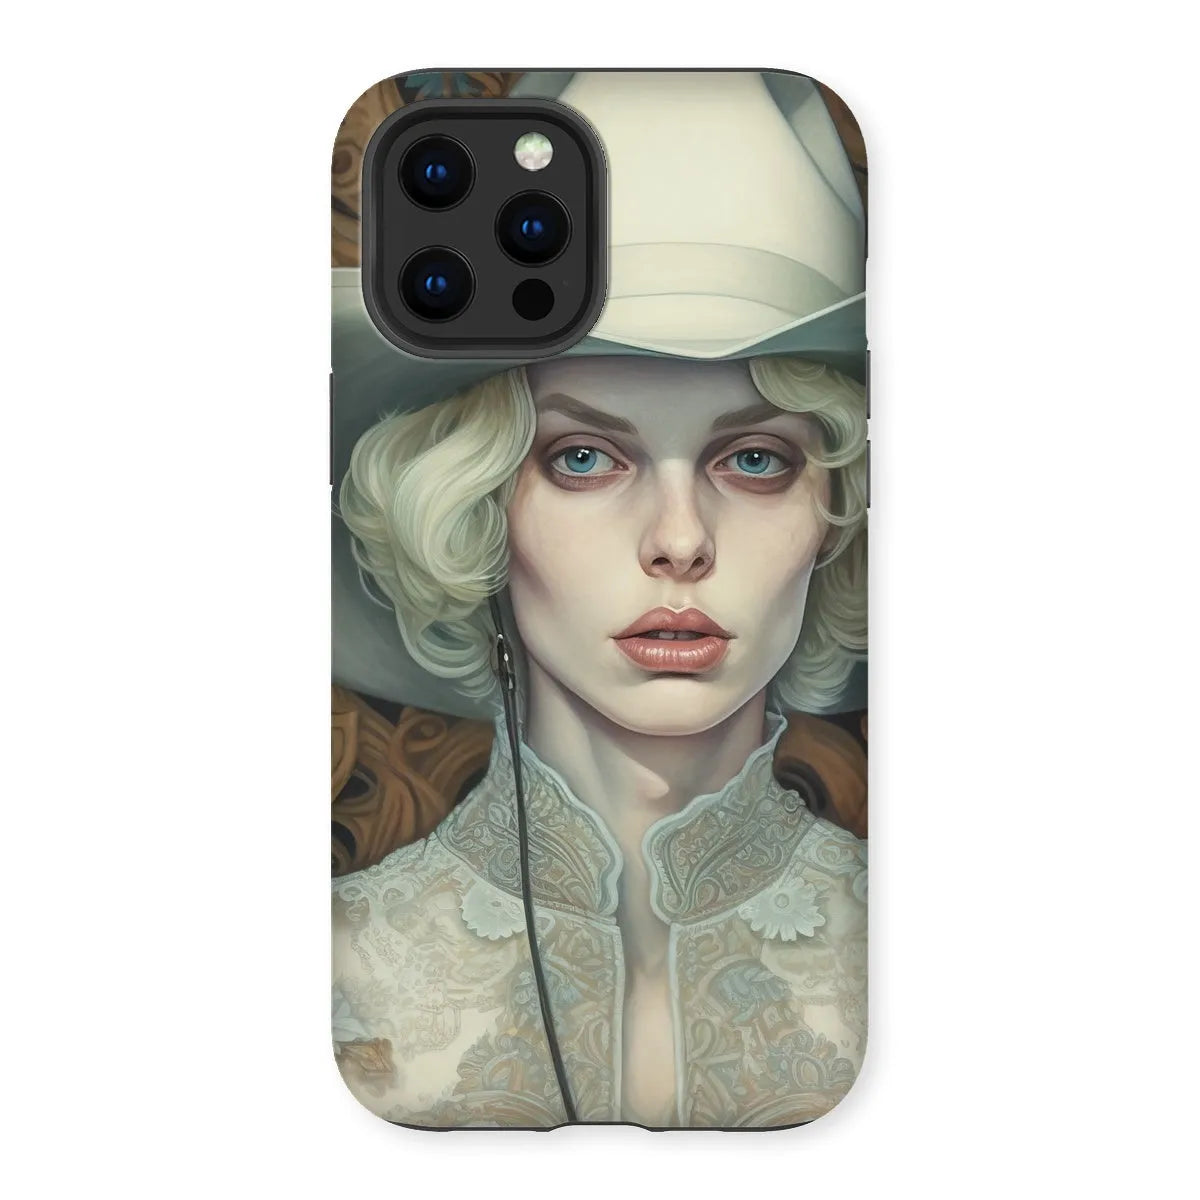 Winnie The Lesbian Cowgirl - Sapphic Art Phone Case - Iphone 12 Pro Max / Matte - Mobile Phone Cases - Aesthetic Art